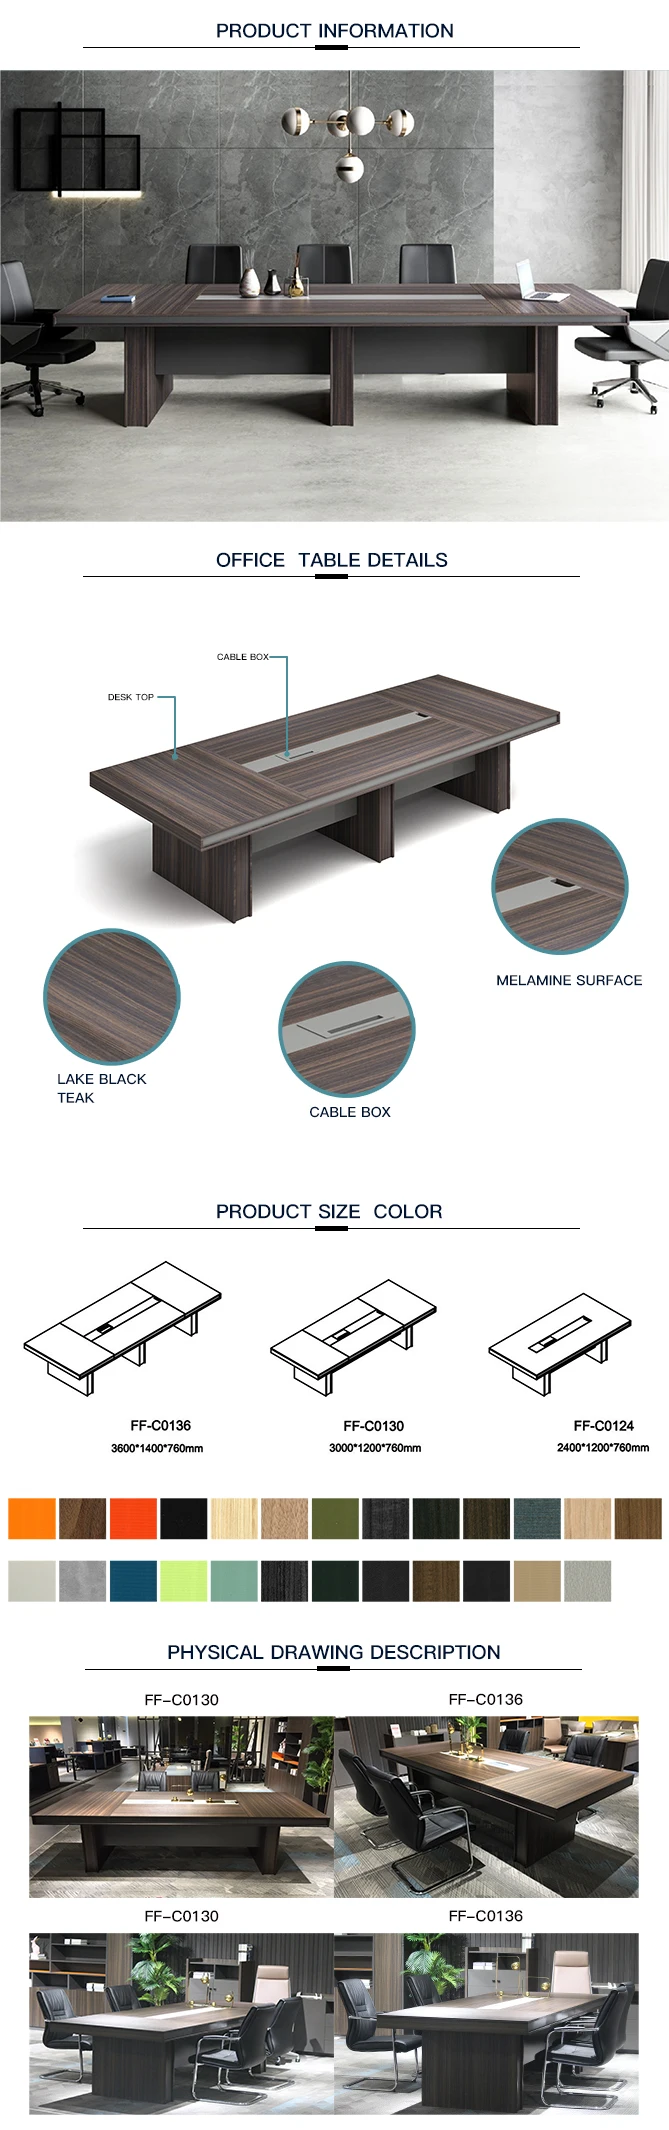 2019 top selling luxury meeting desk lengthen melamine wood conference table with chairs